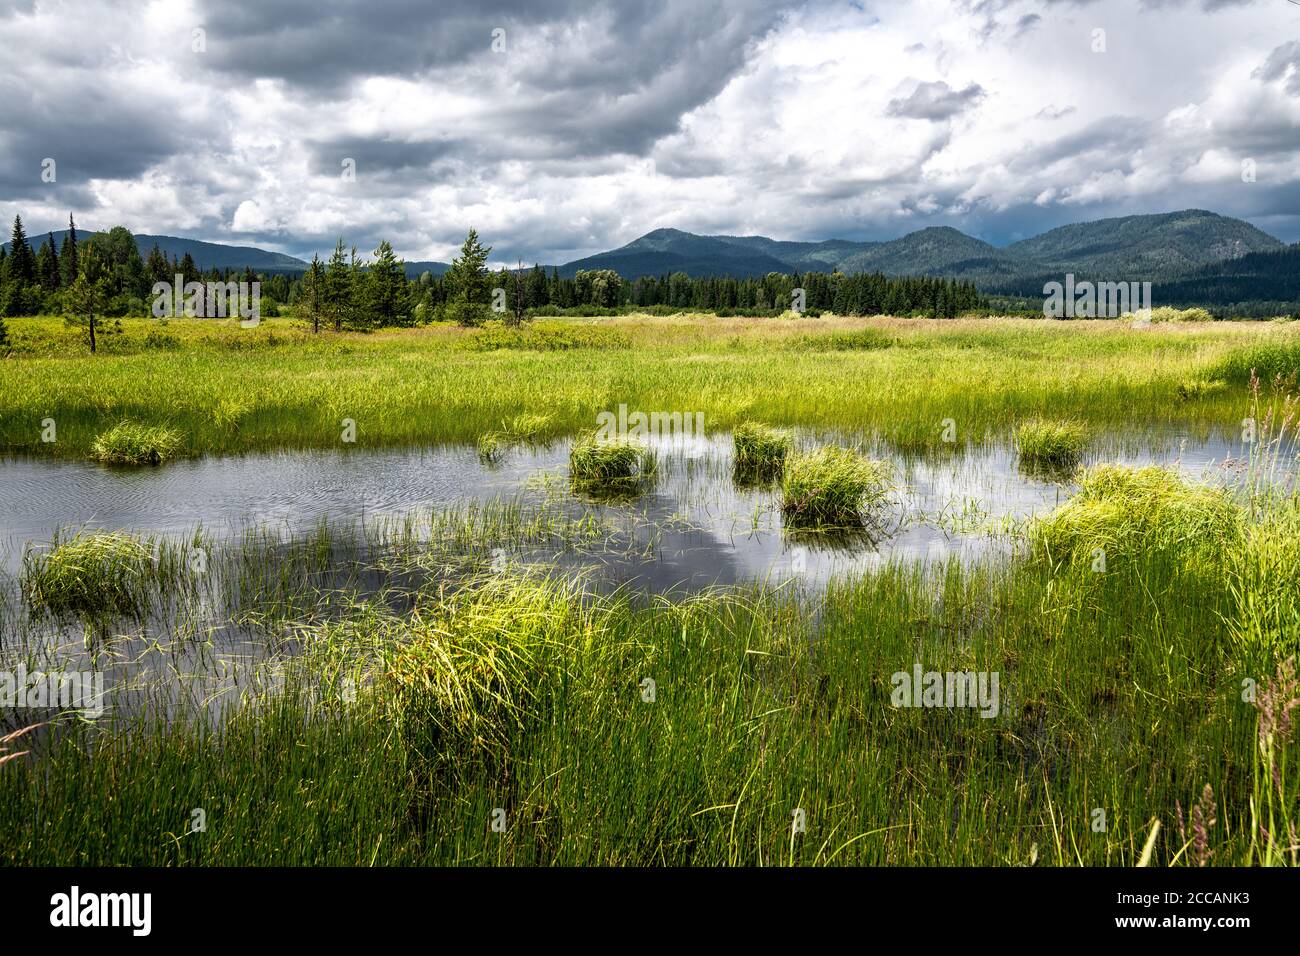 Marshy Landscape in Bonner County close to Priest Lake, Idaho Stock Photo